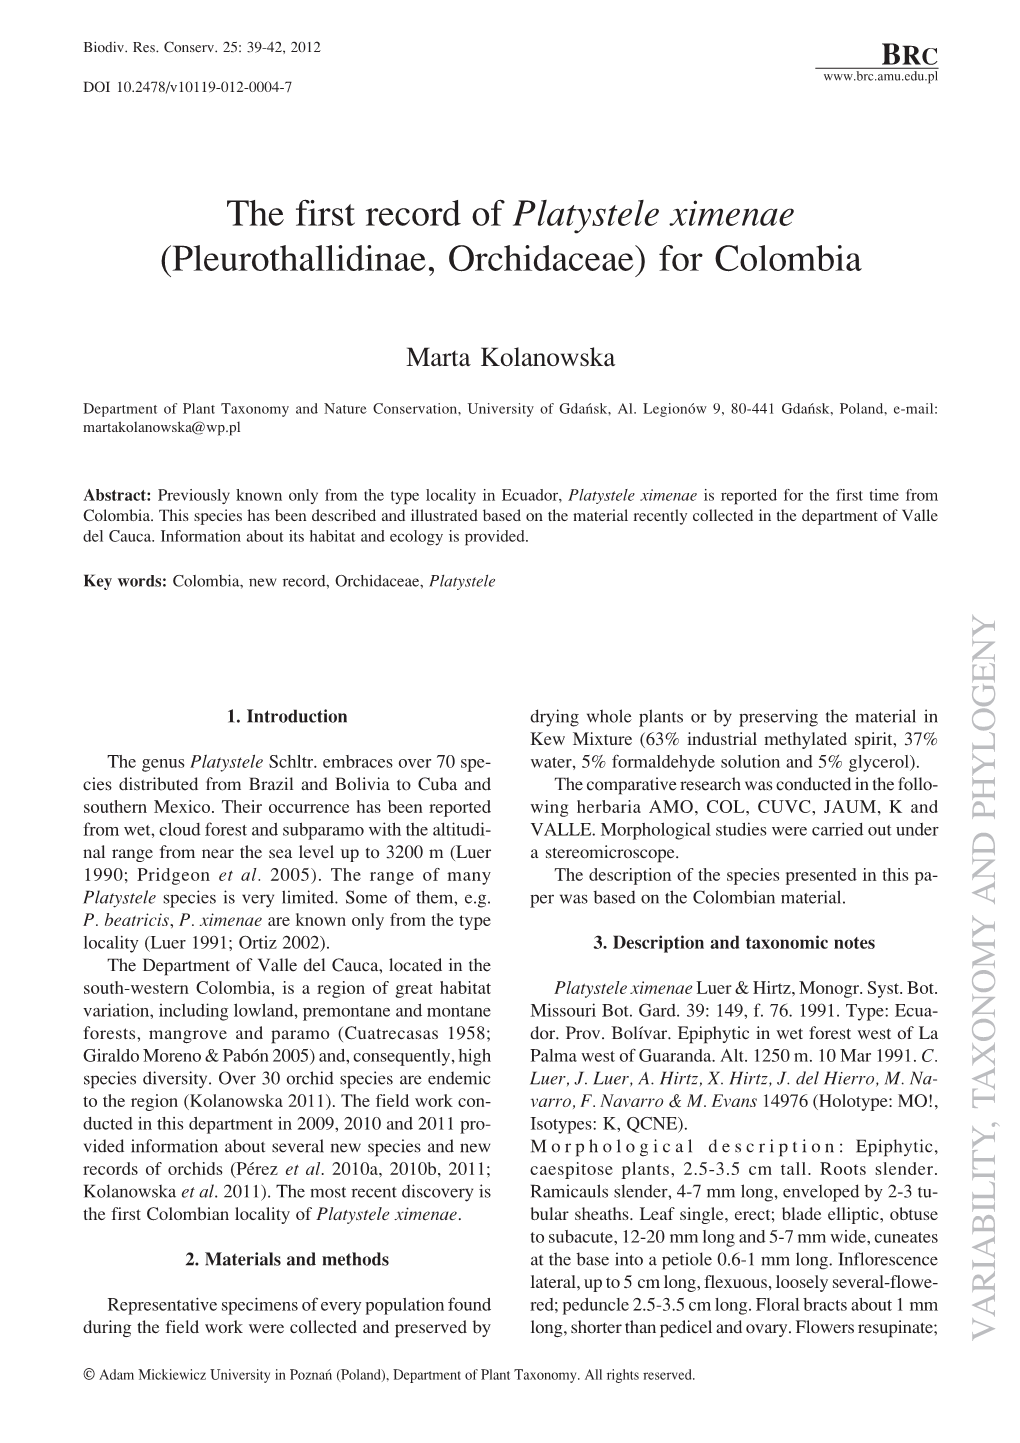 The First Record of Platystele Ximenae (Pleurothallidinae, Orchidaceae) for Colombia